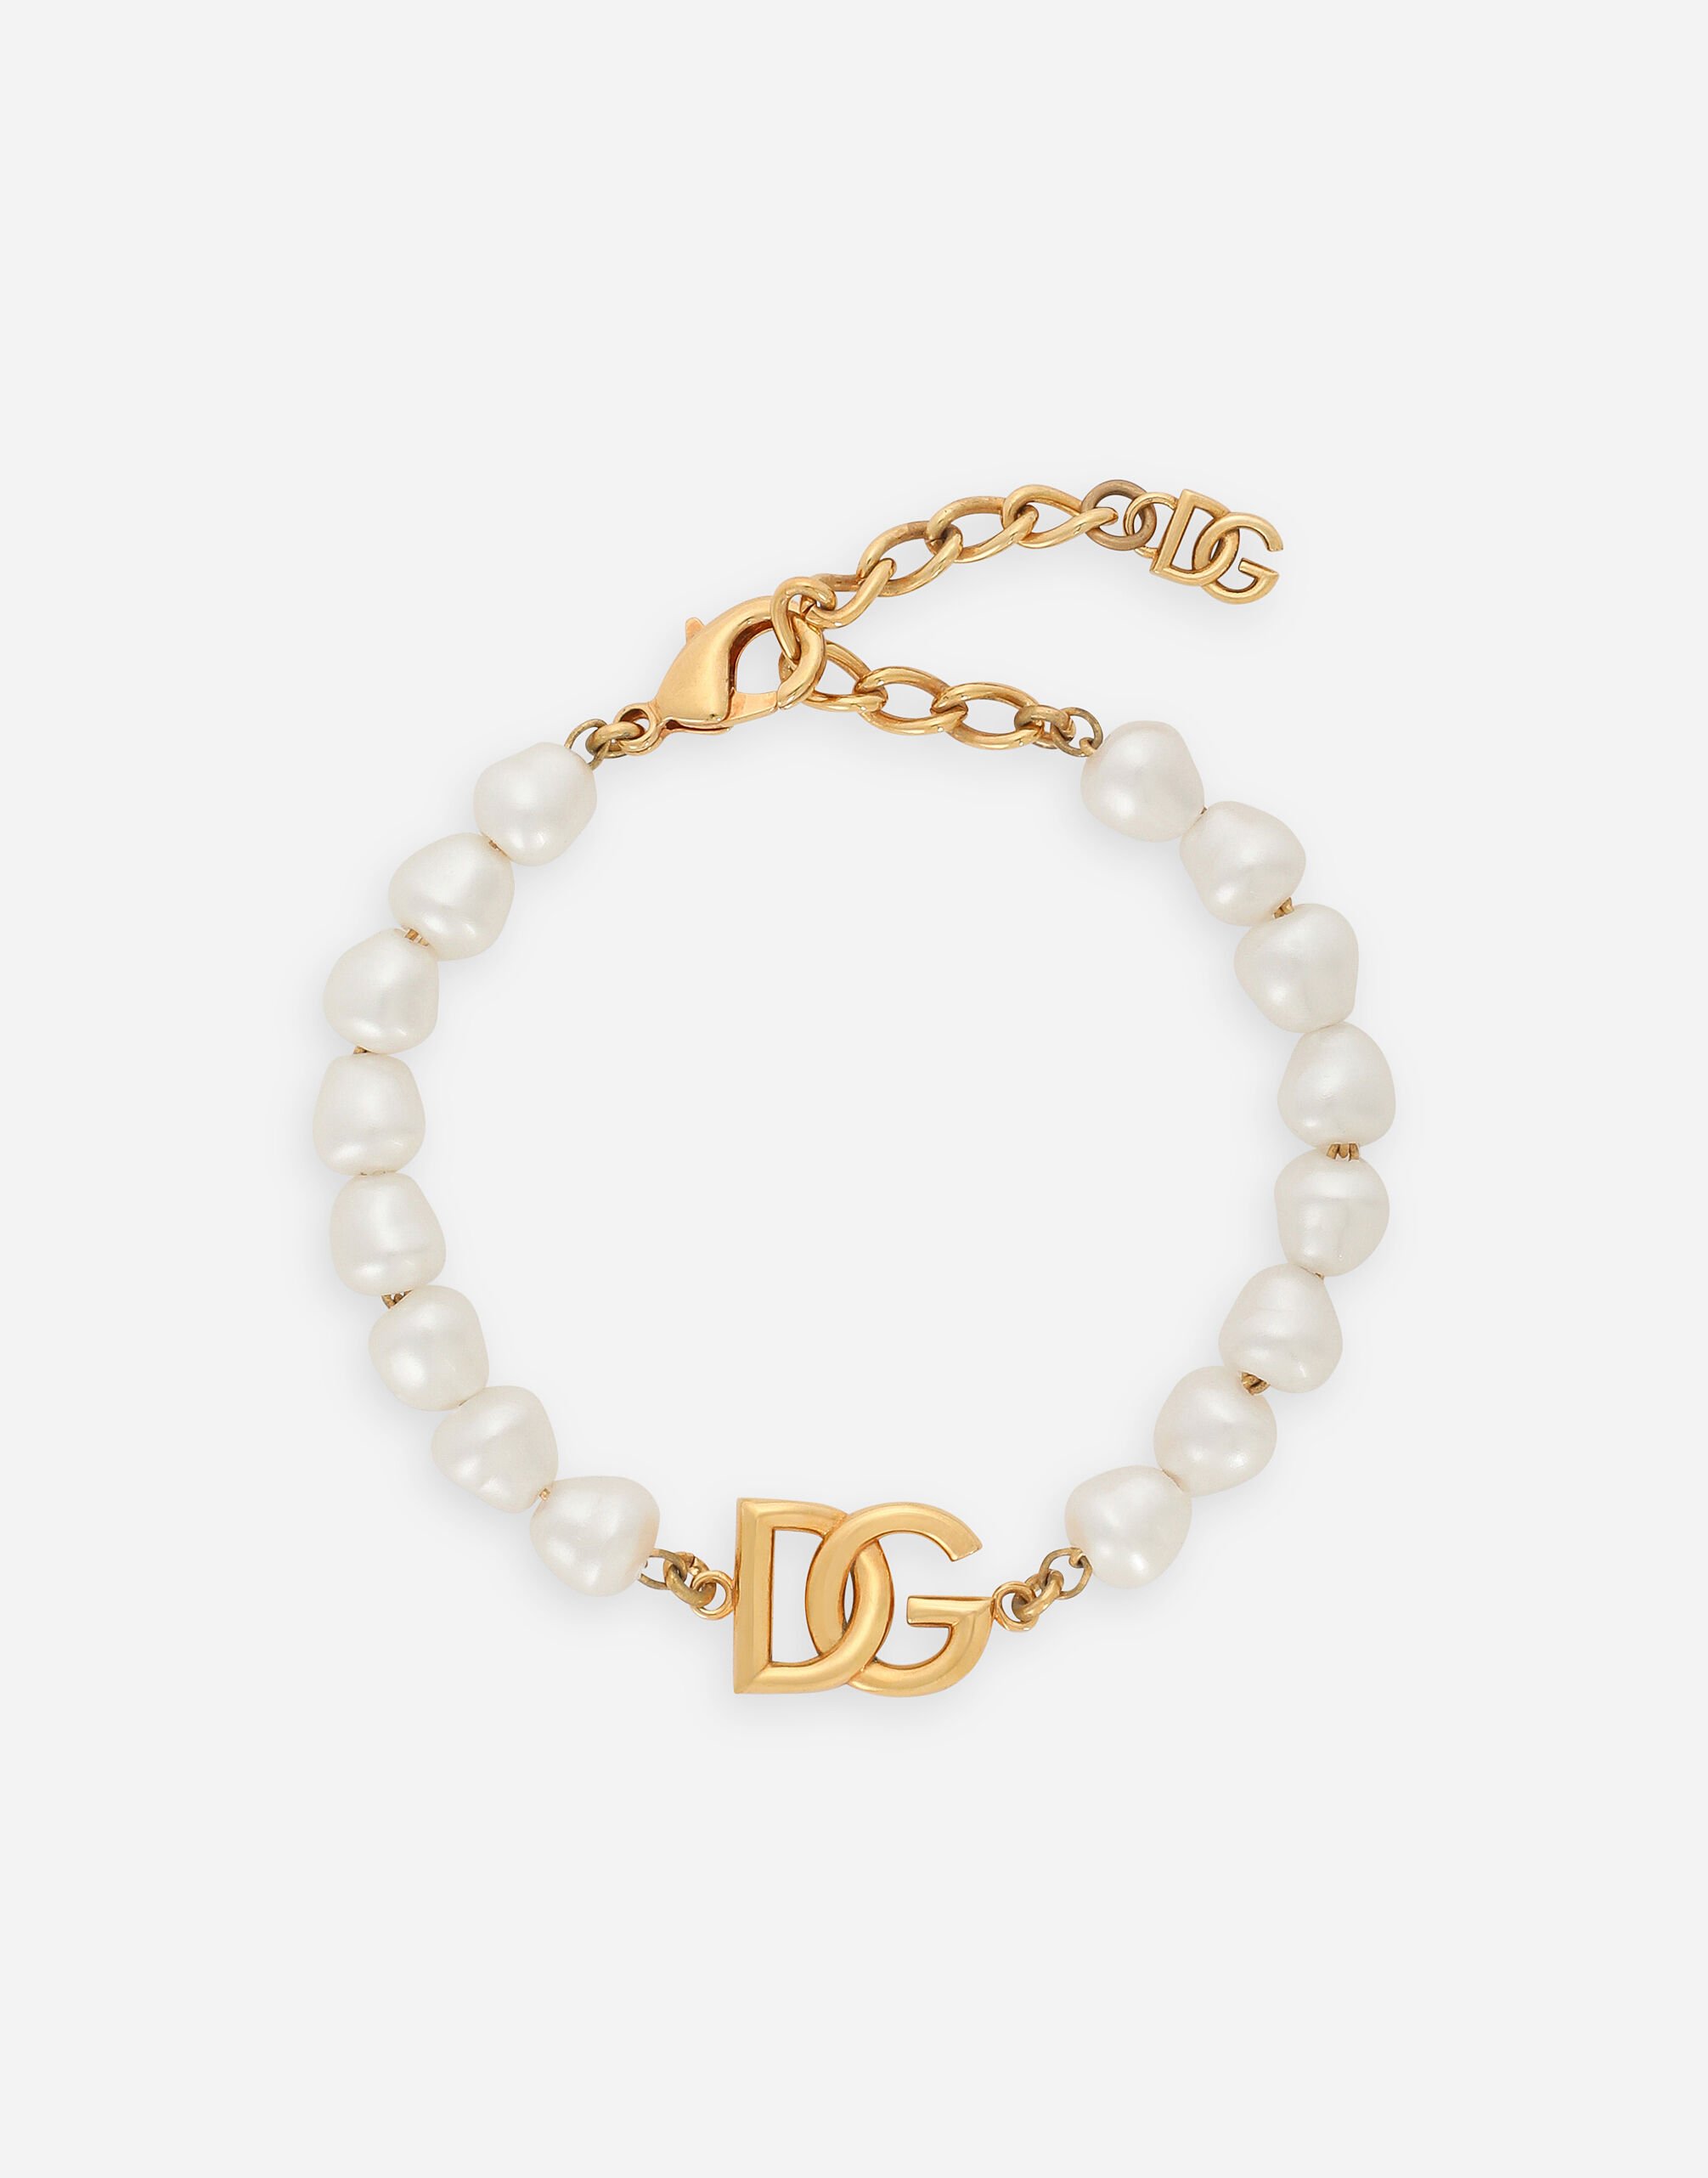 ${brand} Link bracelet with pearls and DG logo ${colorDescription} ${masterID}